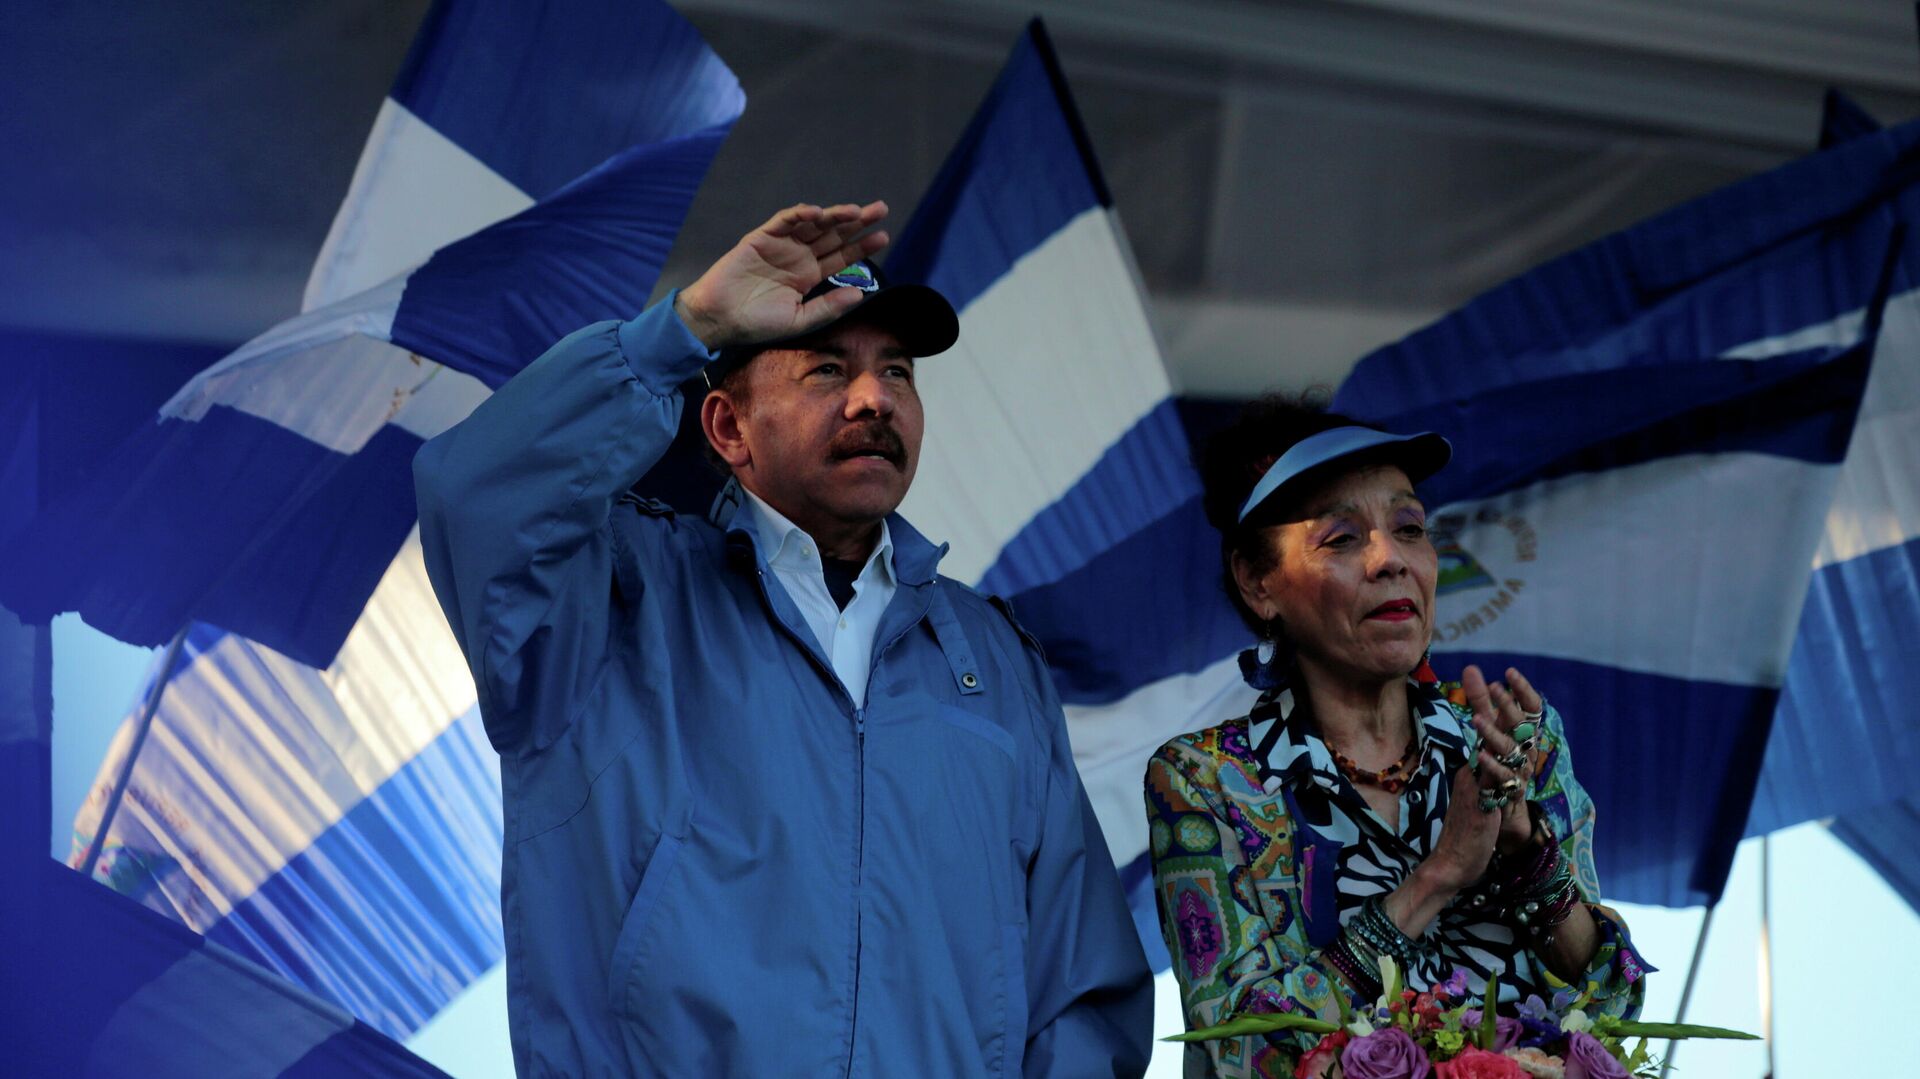 Nicaraguan President Daniel Ortega and Vice President Rosario Murillo gesture during a march called We walk for peace and life. - Sputnik International, 1920, 20.11.2021